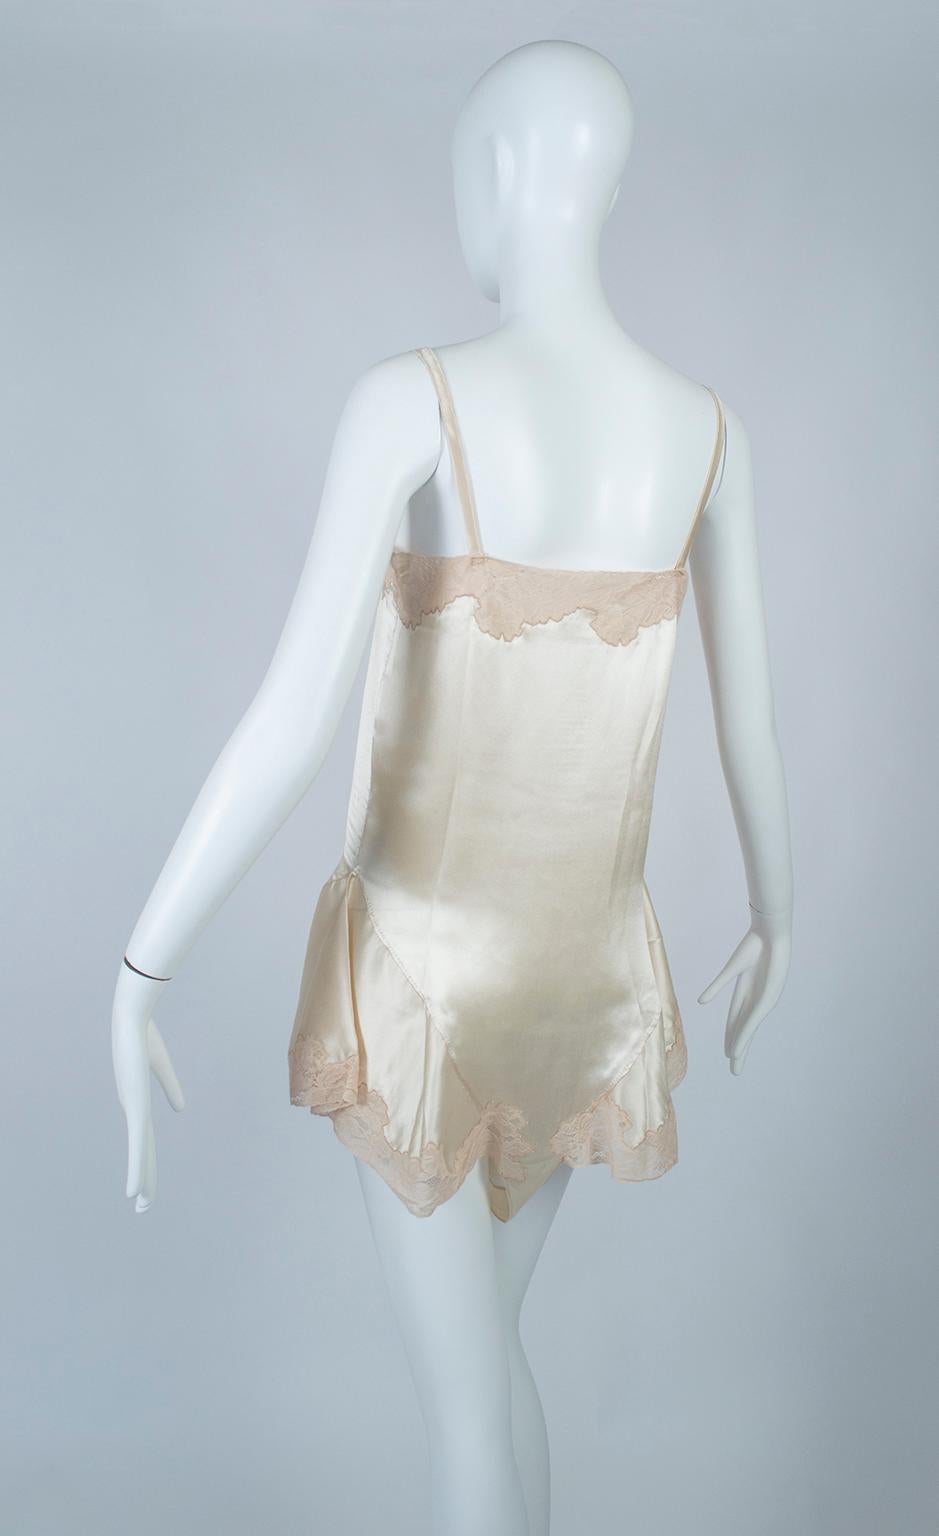 Gray Ivory Bridal Trousseau Lacquered Satin Skirt Leg Step-In Romper Teddy –XS, 1920s For Sale